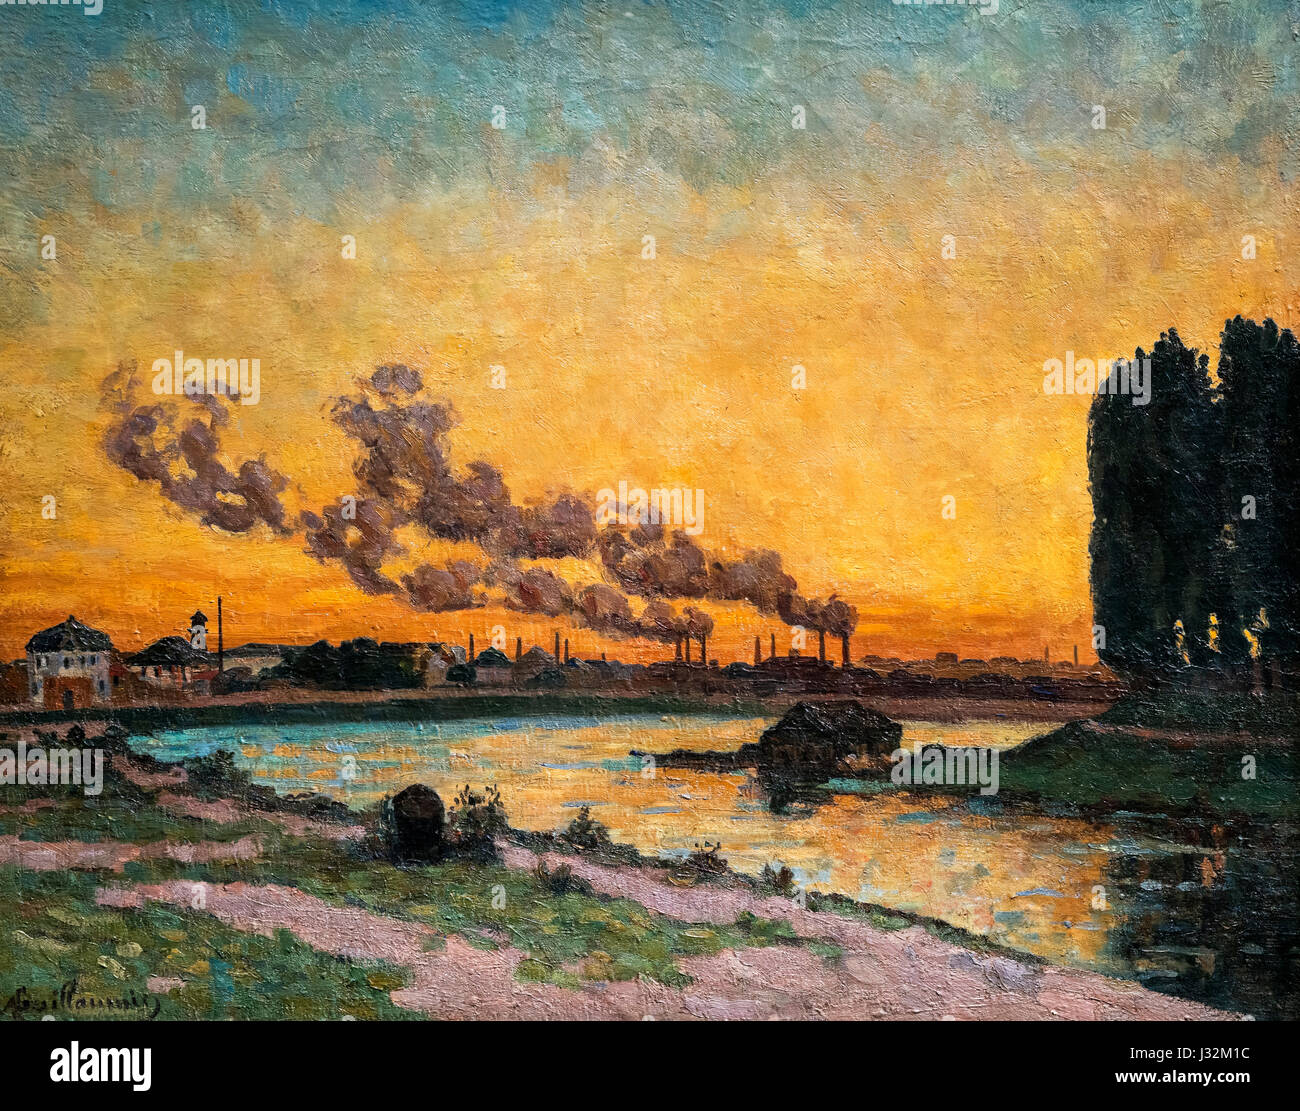 Armand Guillaumin (1841-1927) 'Soleil couchant à Ivry' (Sunset at Ivry), oil on canvas, c.1873 Stock Photo